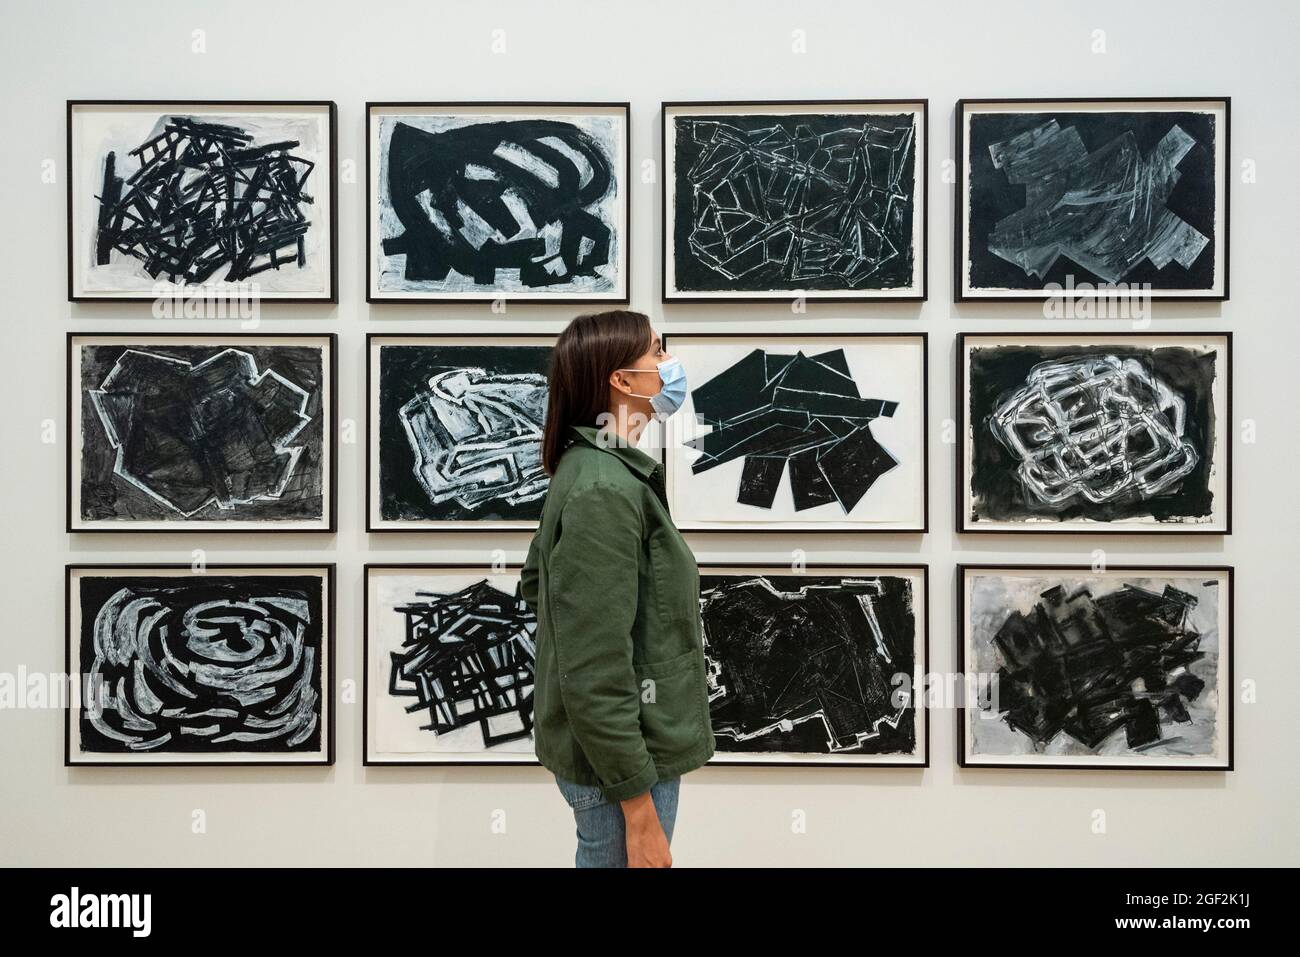 London, UK.  23 August 2021. A staff member views untitled monochromatic works at the preview of ARTIST ROOMS: Phyllida Barlow, a new exhibition of work by British artist Phyllida Barlow which includes several large-scale installations and a selection of drawings across her sixty-year career.   Credit: Stephen Chung / Alamy Live News Stock Photo